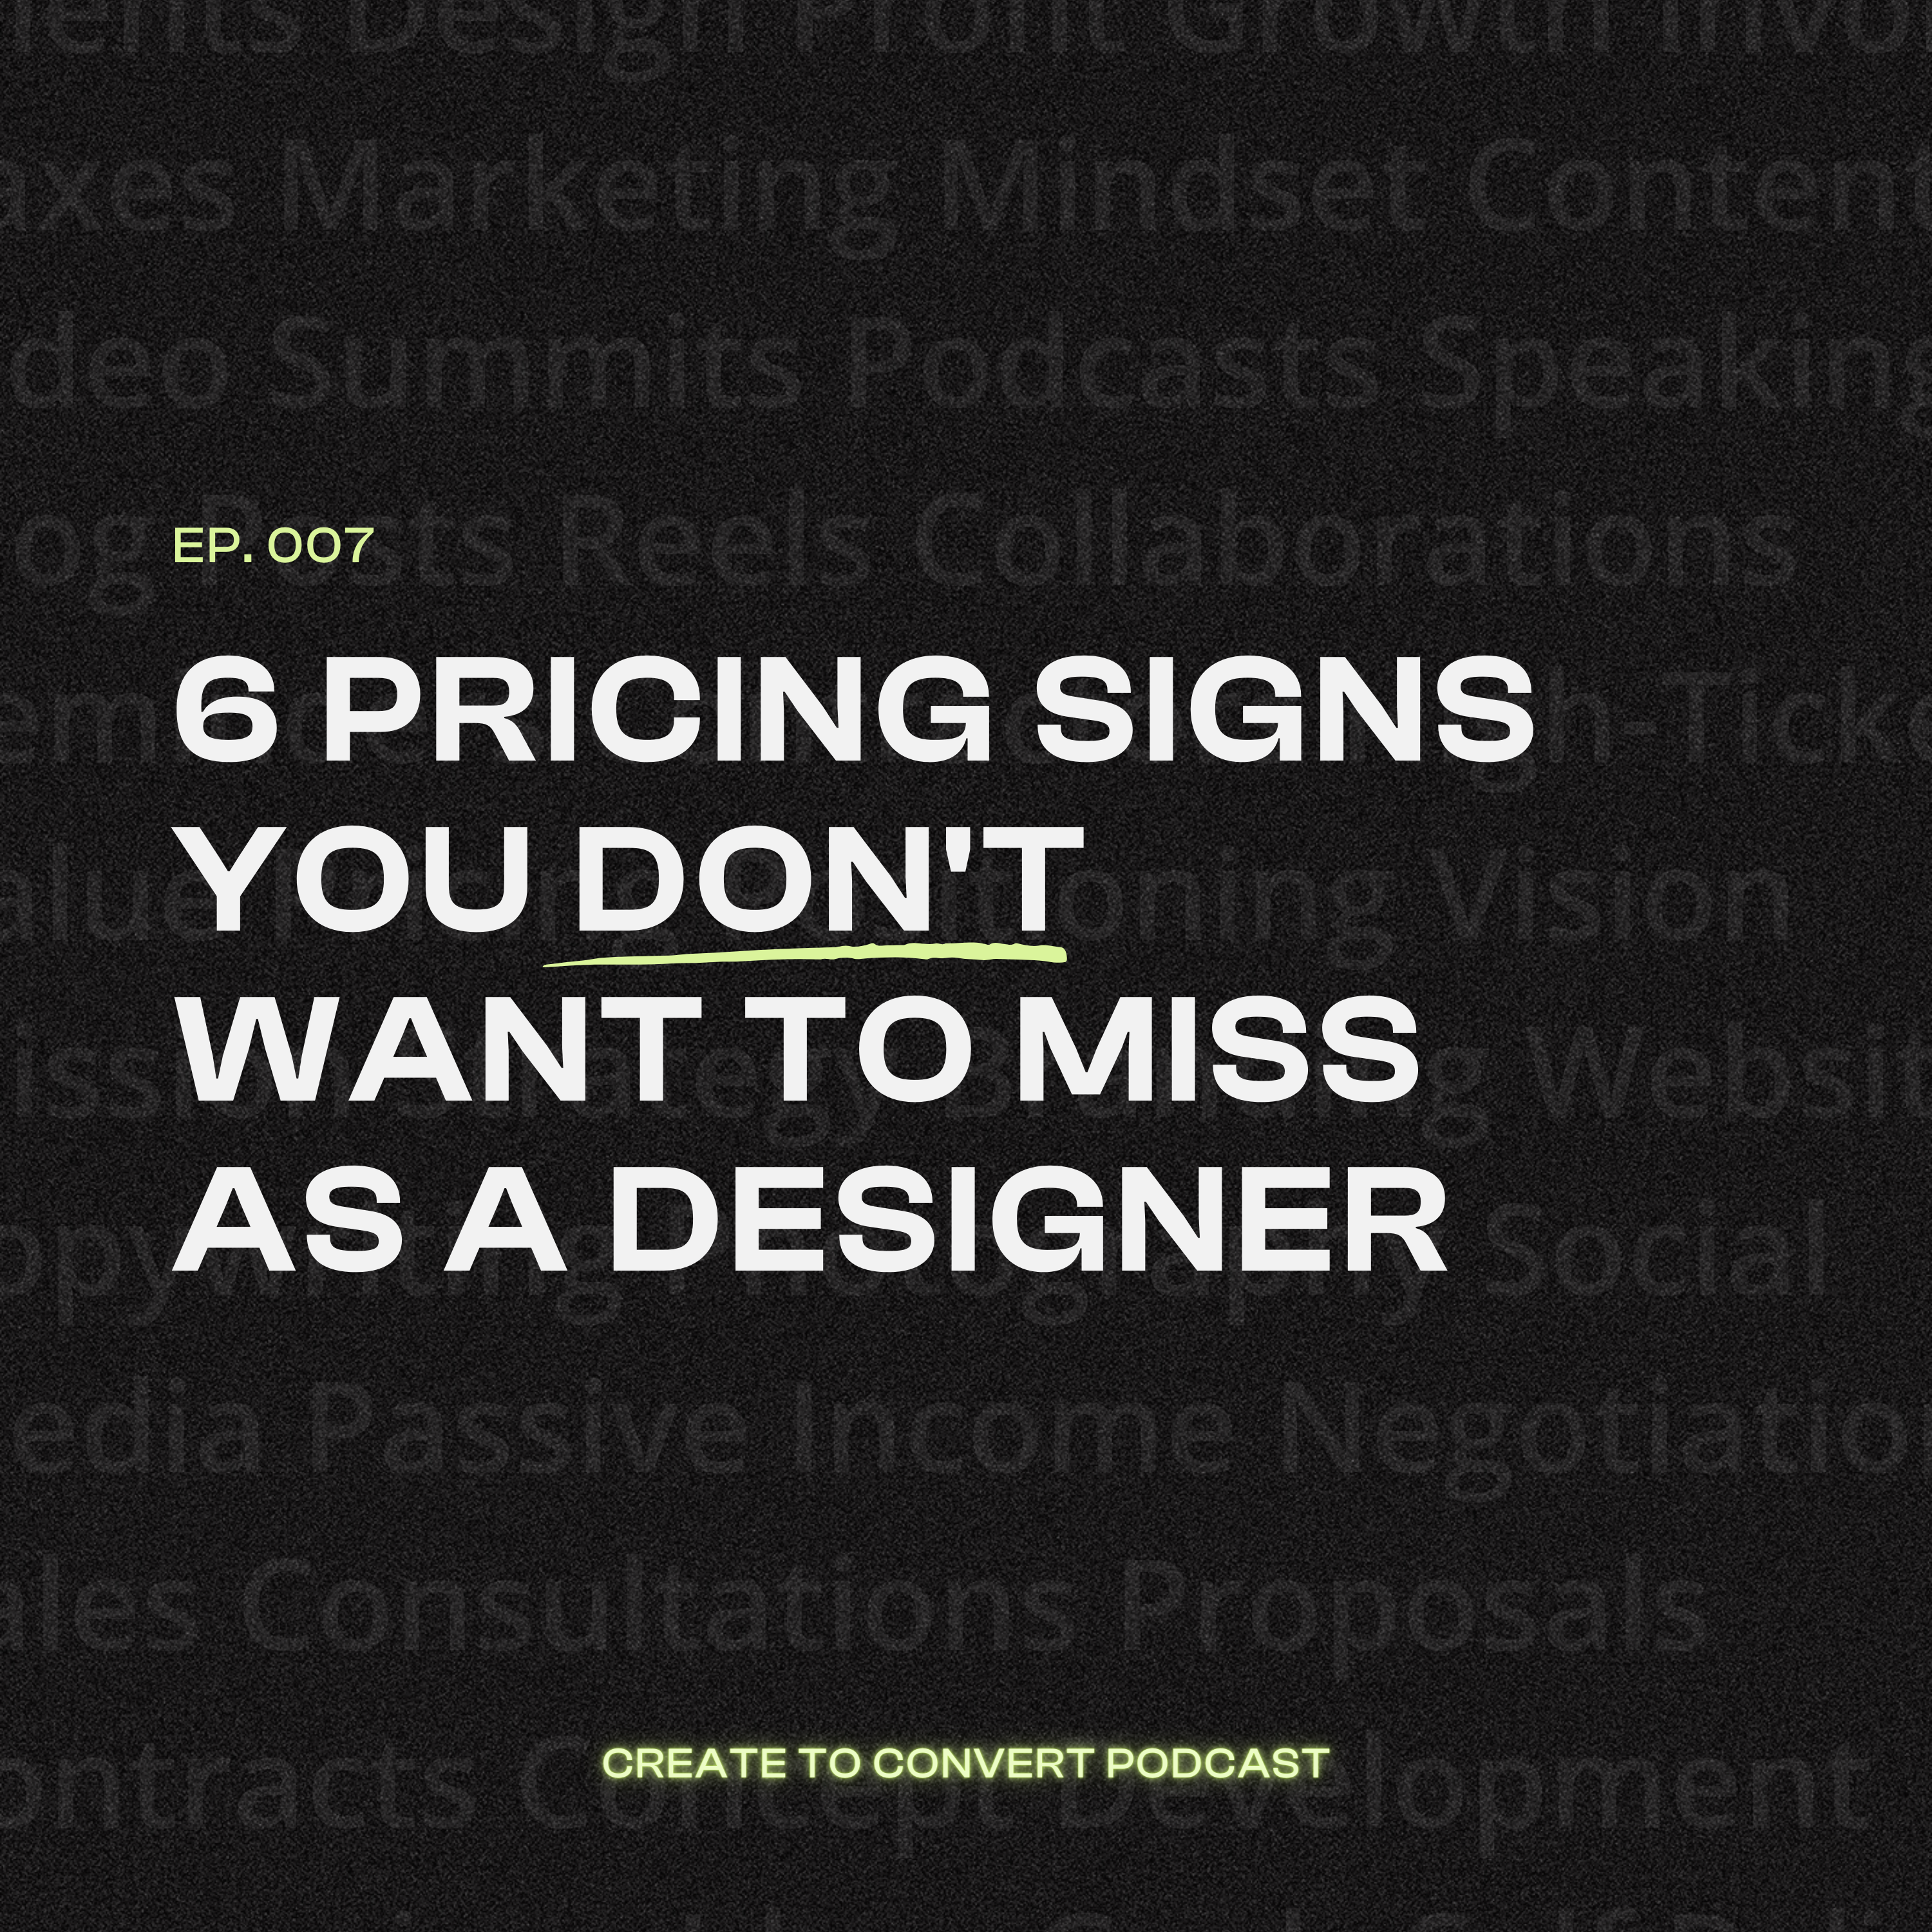 Podcast cover for the episode reading "6 Pricing Signs you Don't want to miss as a designer"